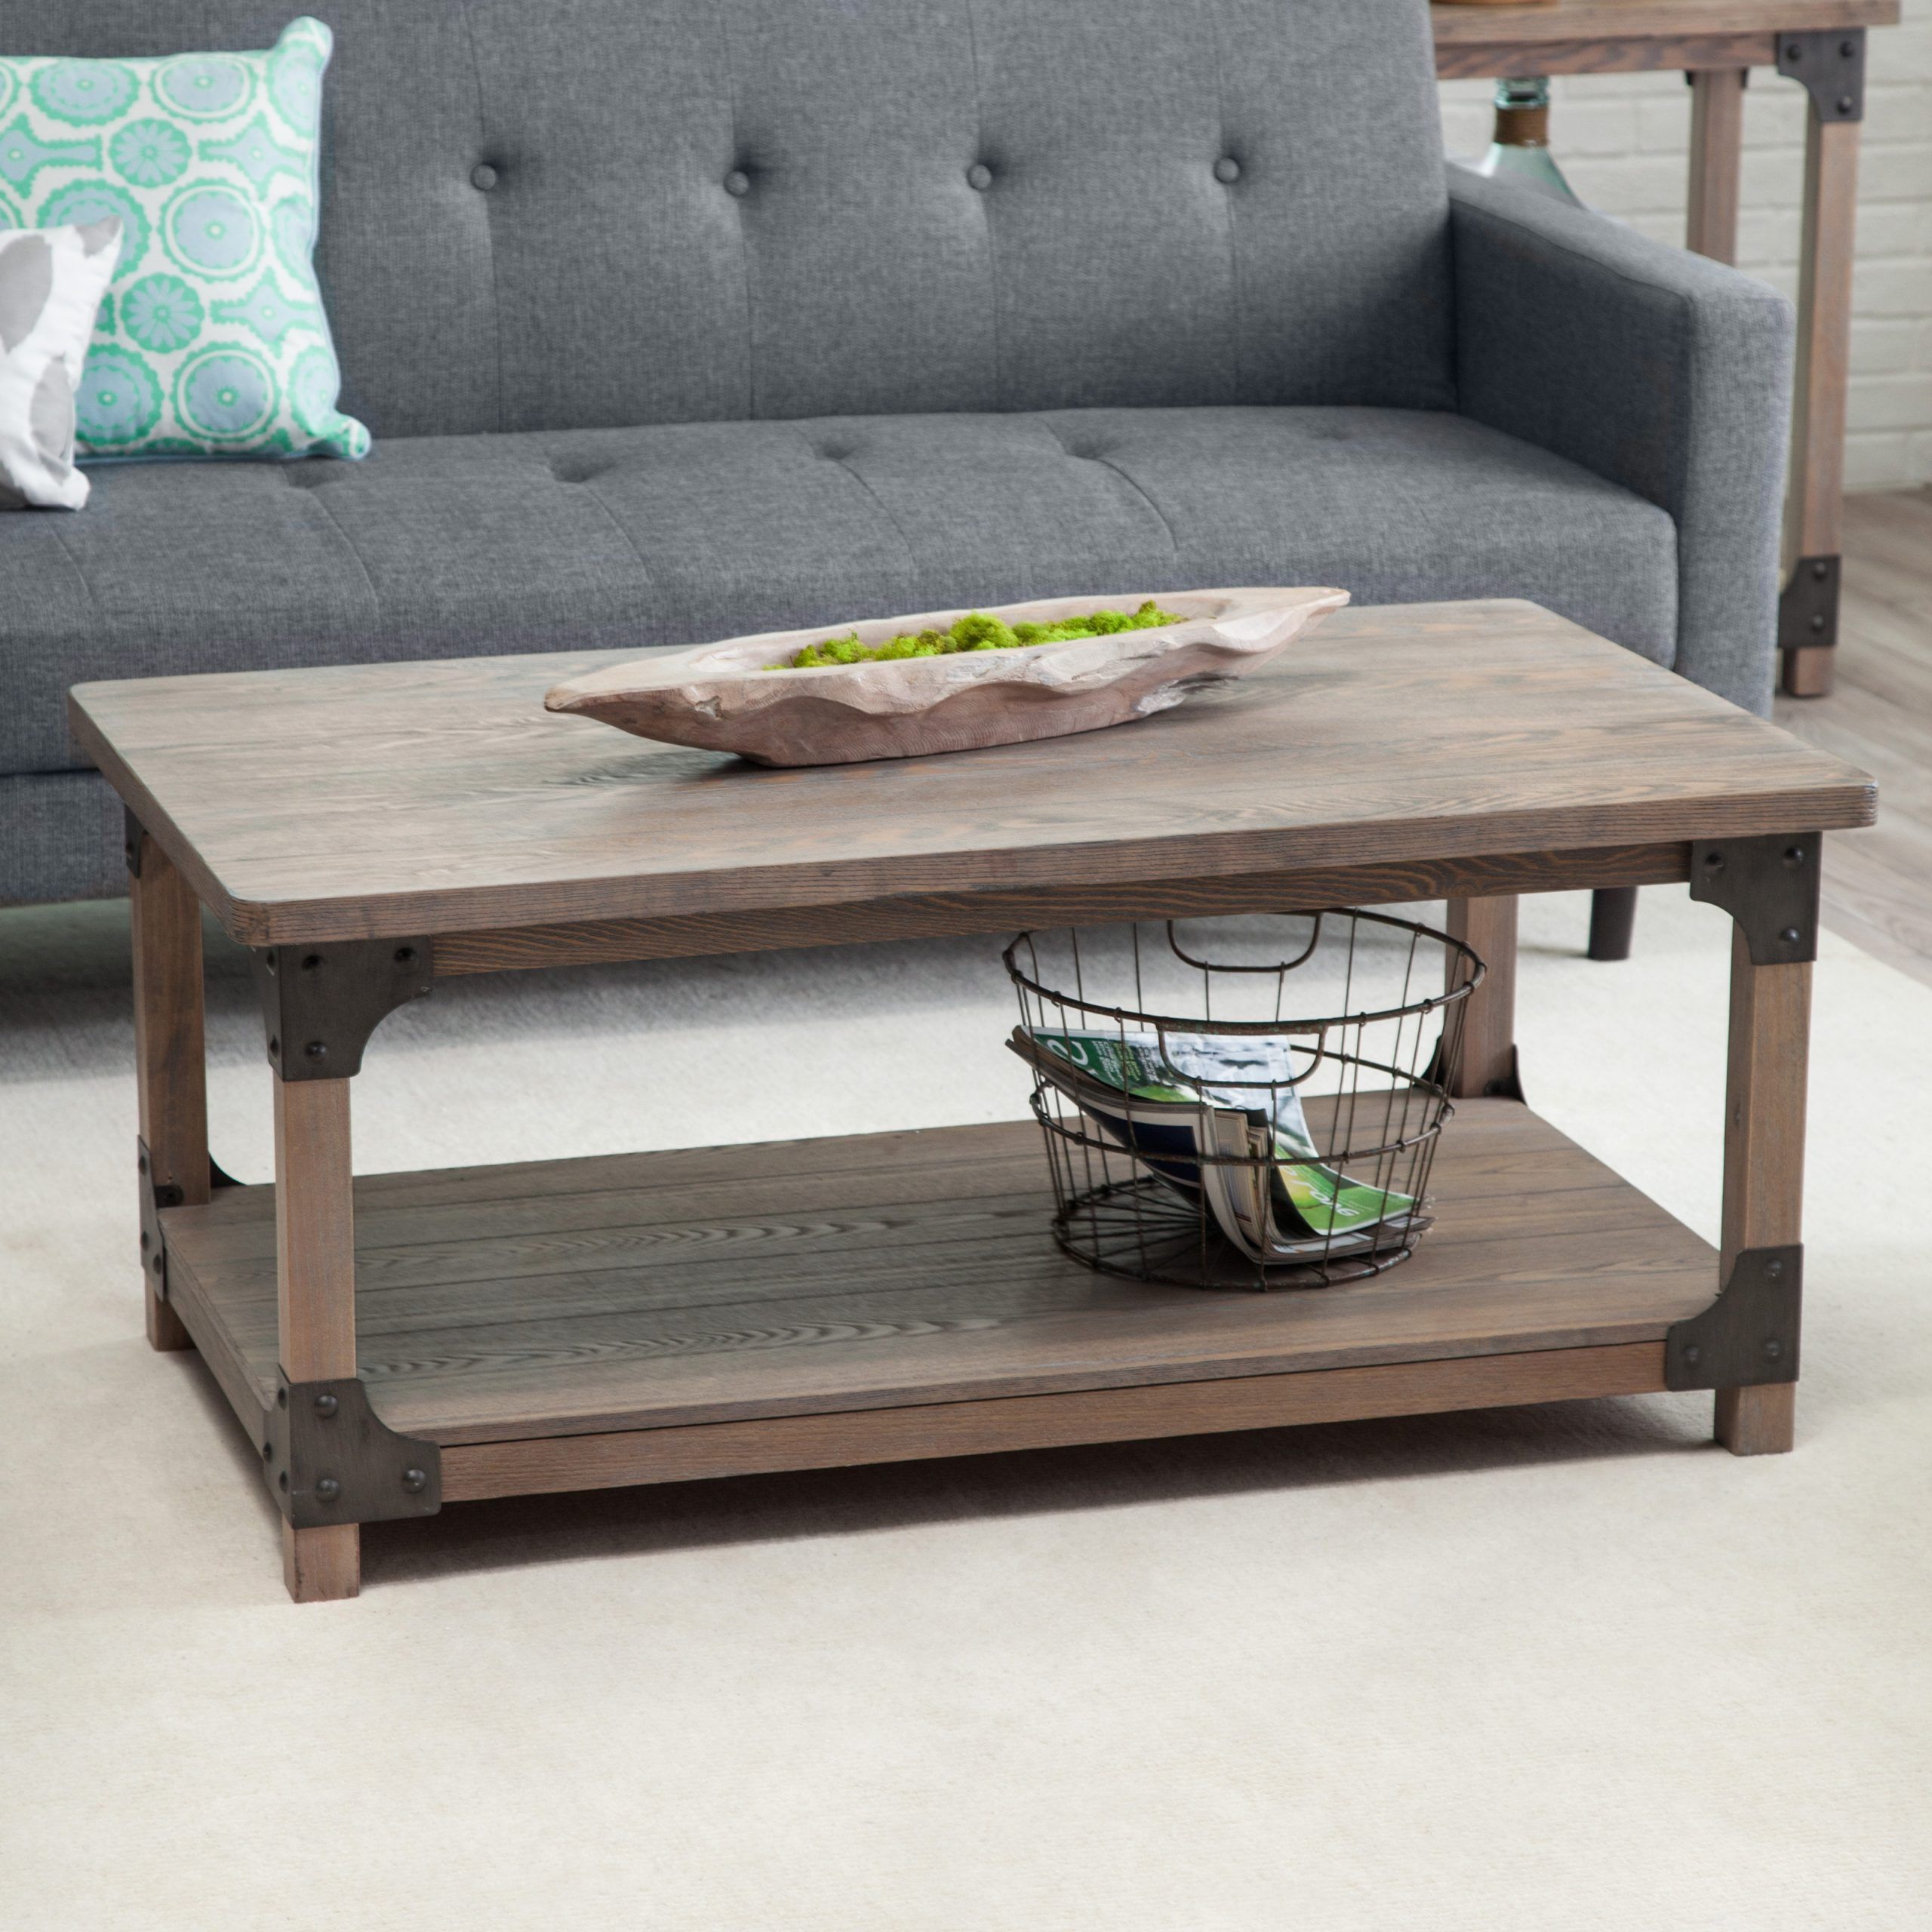 Belham Living Jamestown Rustic Coffee Table With Unique Pertaining To Most Current Gray Driftwood Storage Coffee Tables (View 7 of 20)